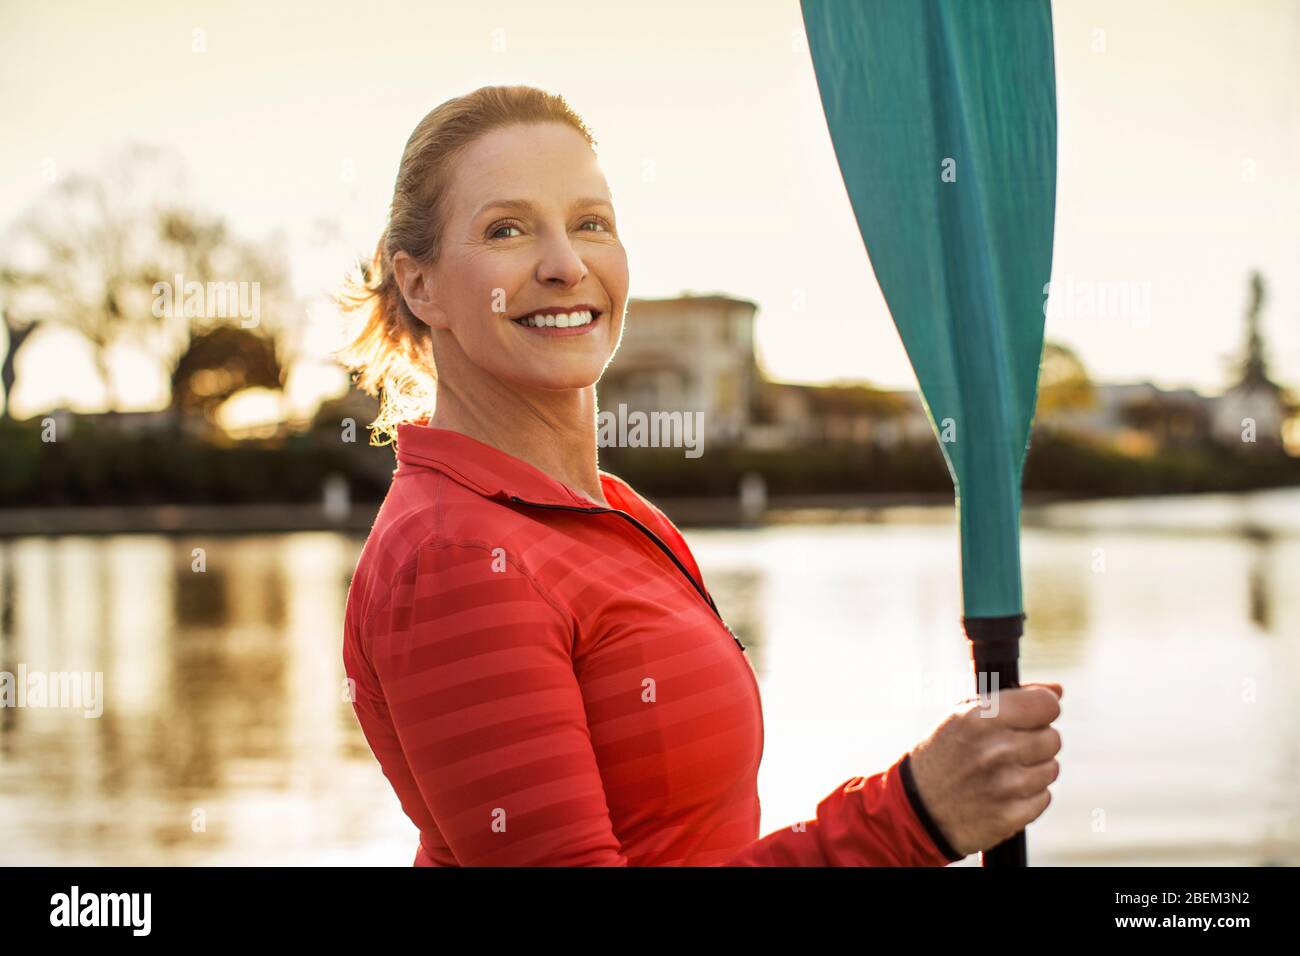 Portrait of a happy mid adult woman holding an oar by a lake Stock Photo